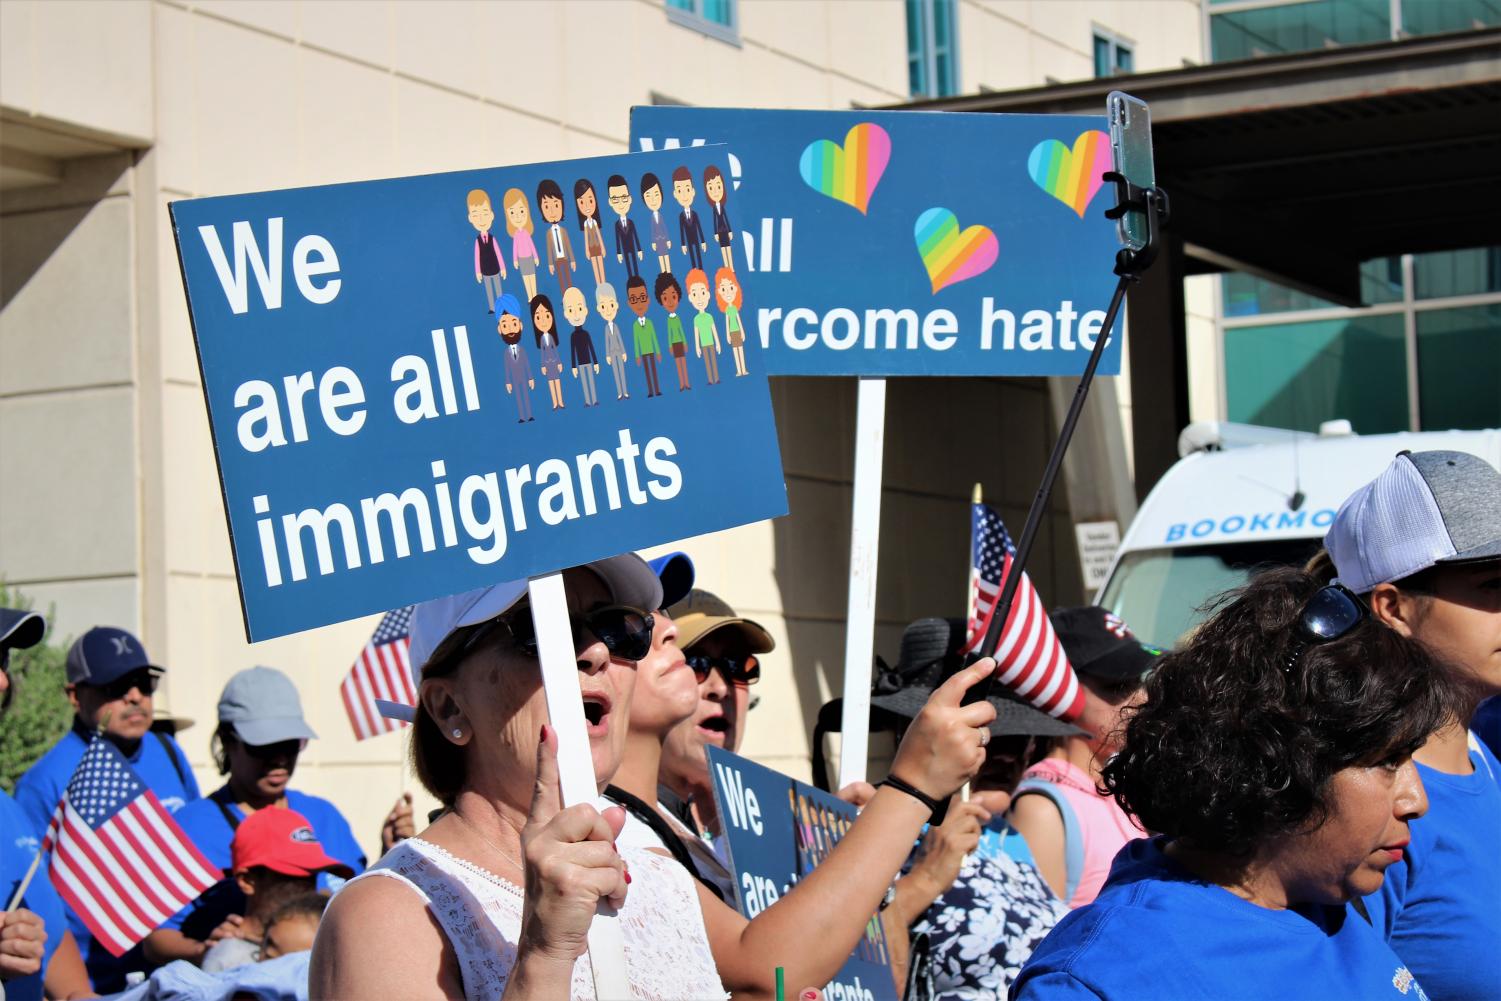 Families+Belong+Together+and+Free+march+brings+unity